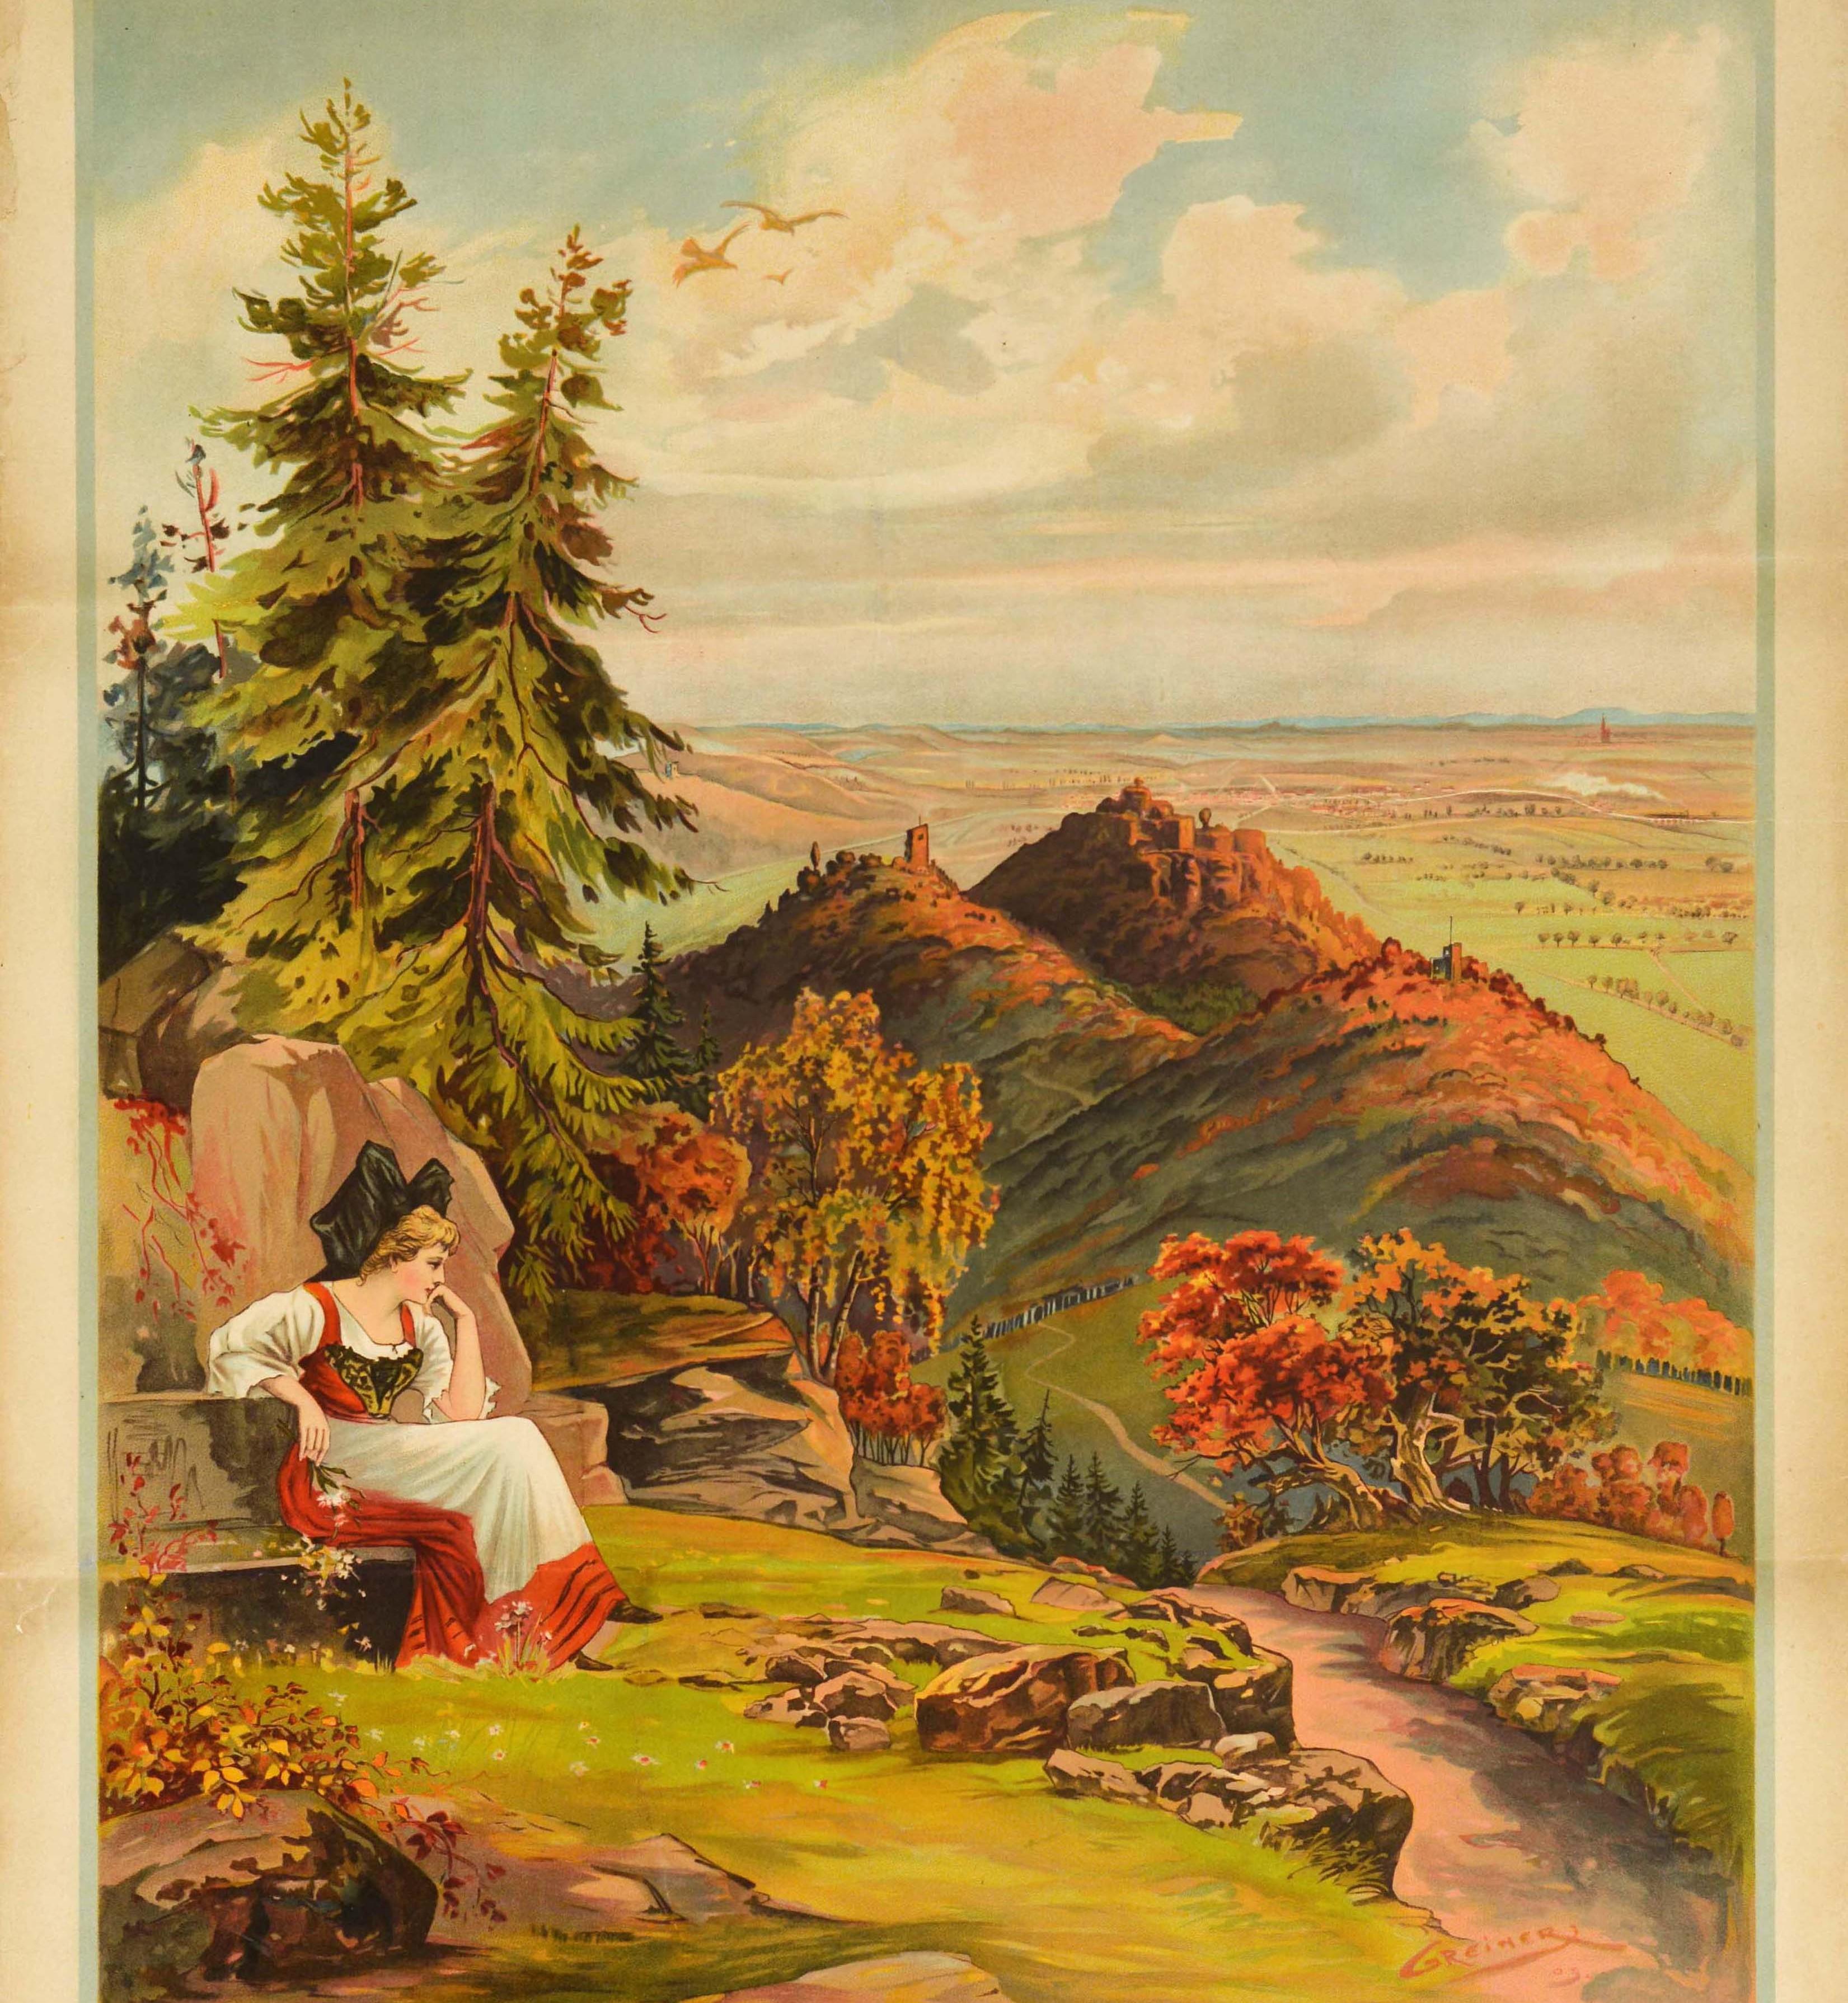 Original antique travel poster - Chemins de Fer de l'Est Excursions en Alsace billets a prix reduits / Eastern Railways Excursions in Alsace reduced tickets - featuring scenic artwork depicting a young lady in traditional dress sitting on rocks to